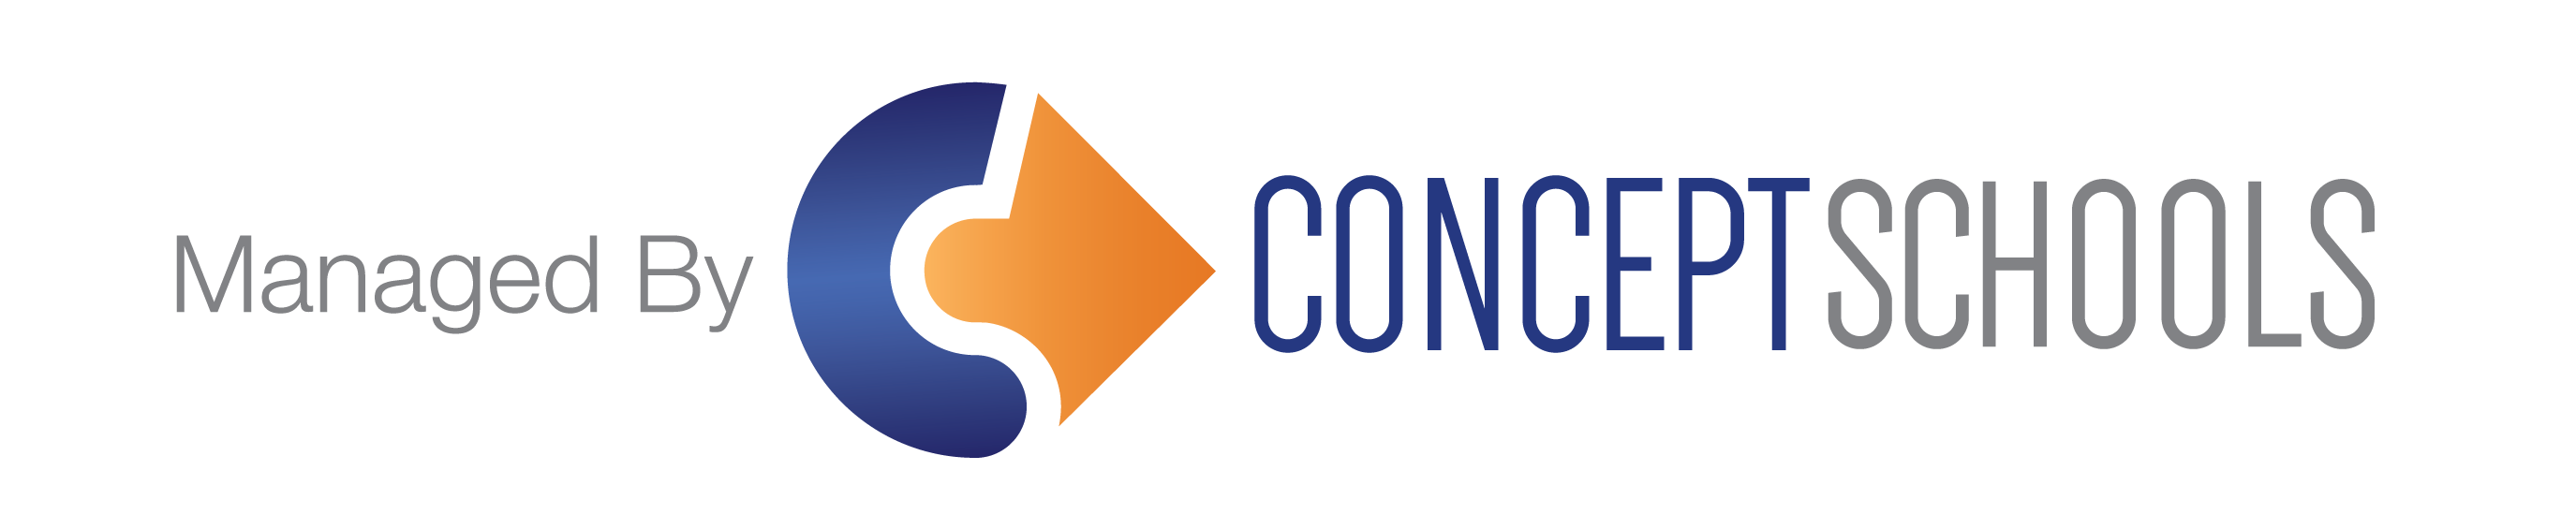 Managed by Concept Schools logo